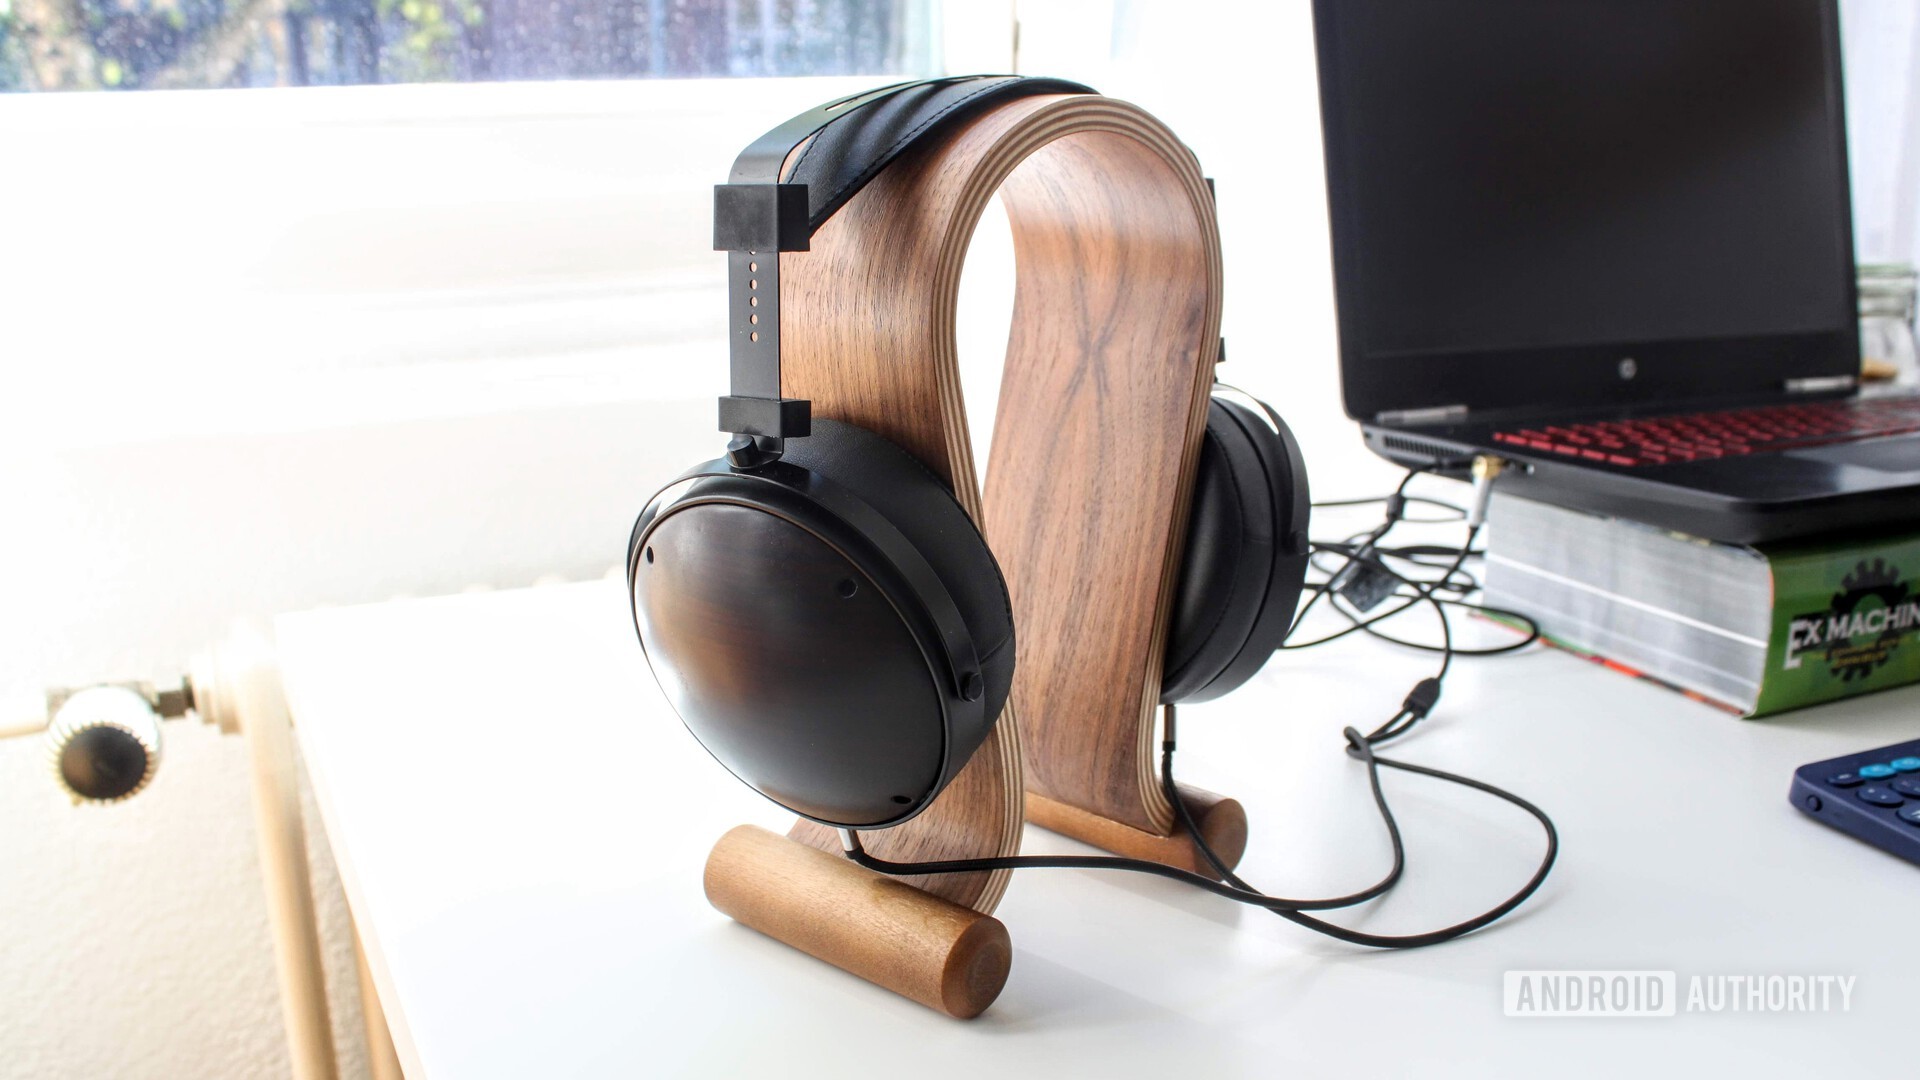 Monolith by Monoprice M1060C headphones with a headphone stand